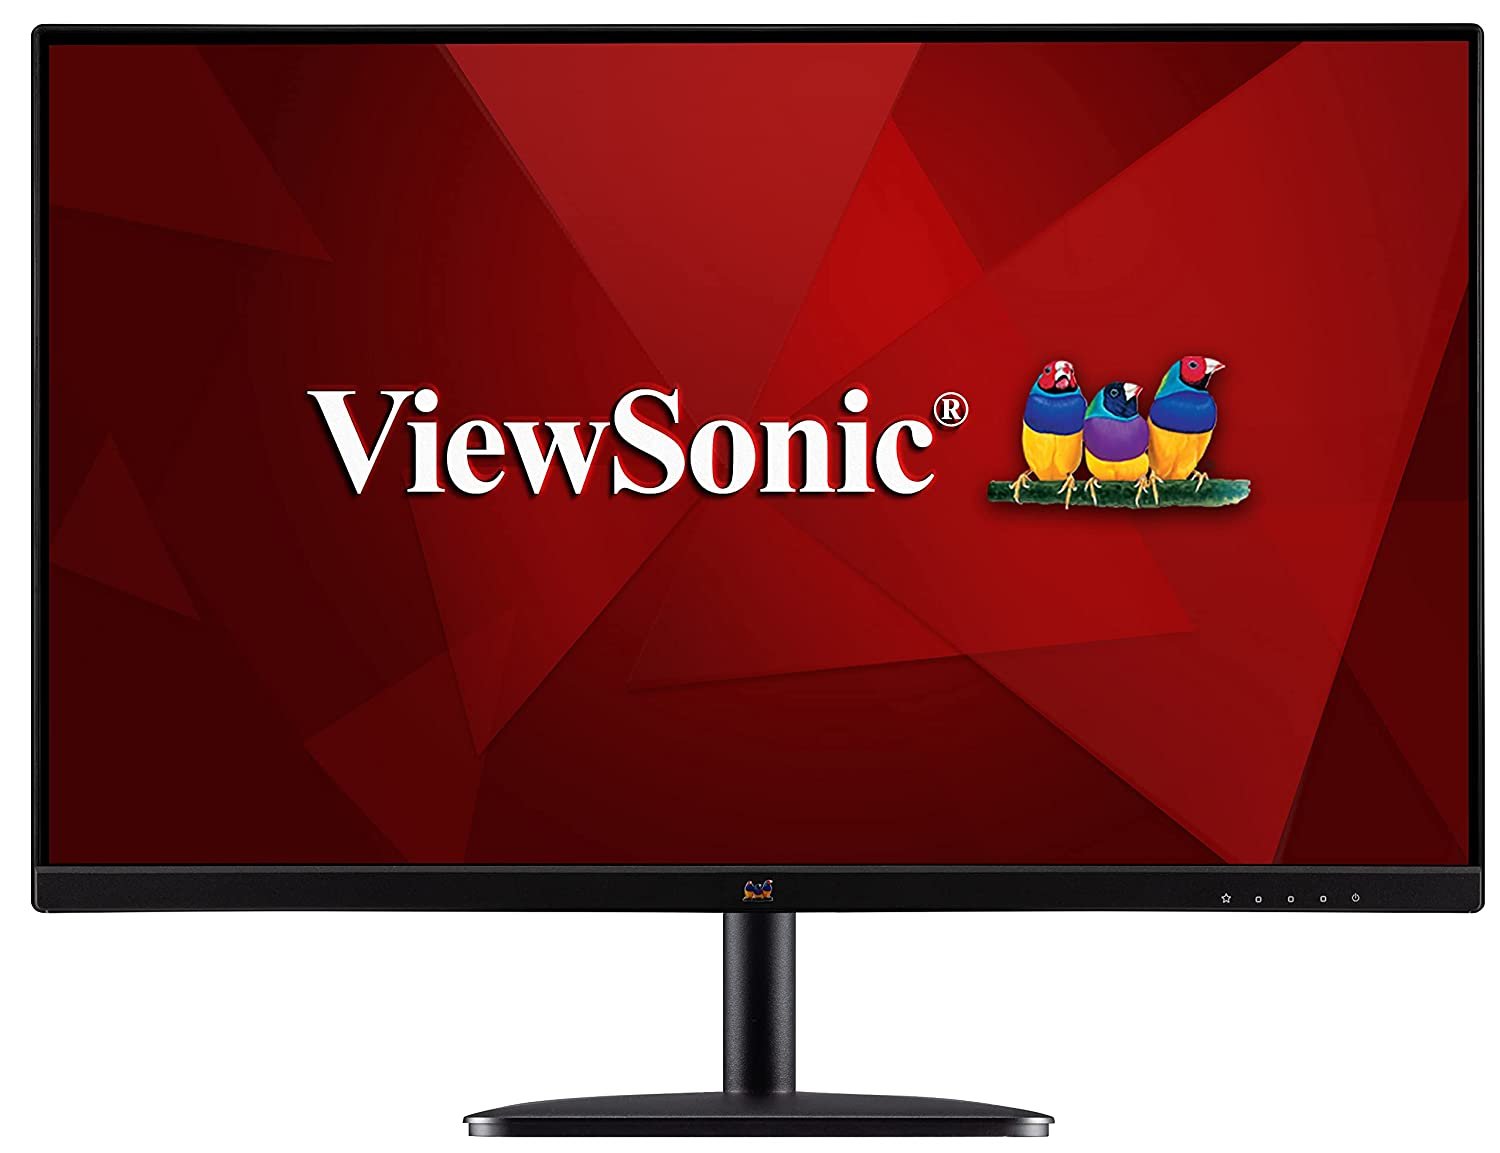 ViewSonic India Brings to you The Best Diwali Gifts for Tech Lovers